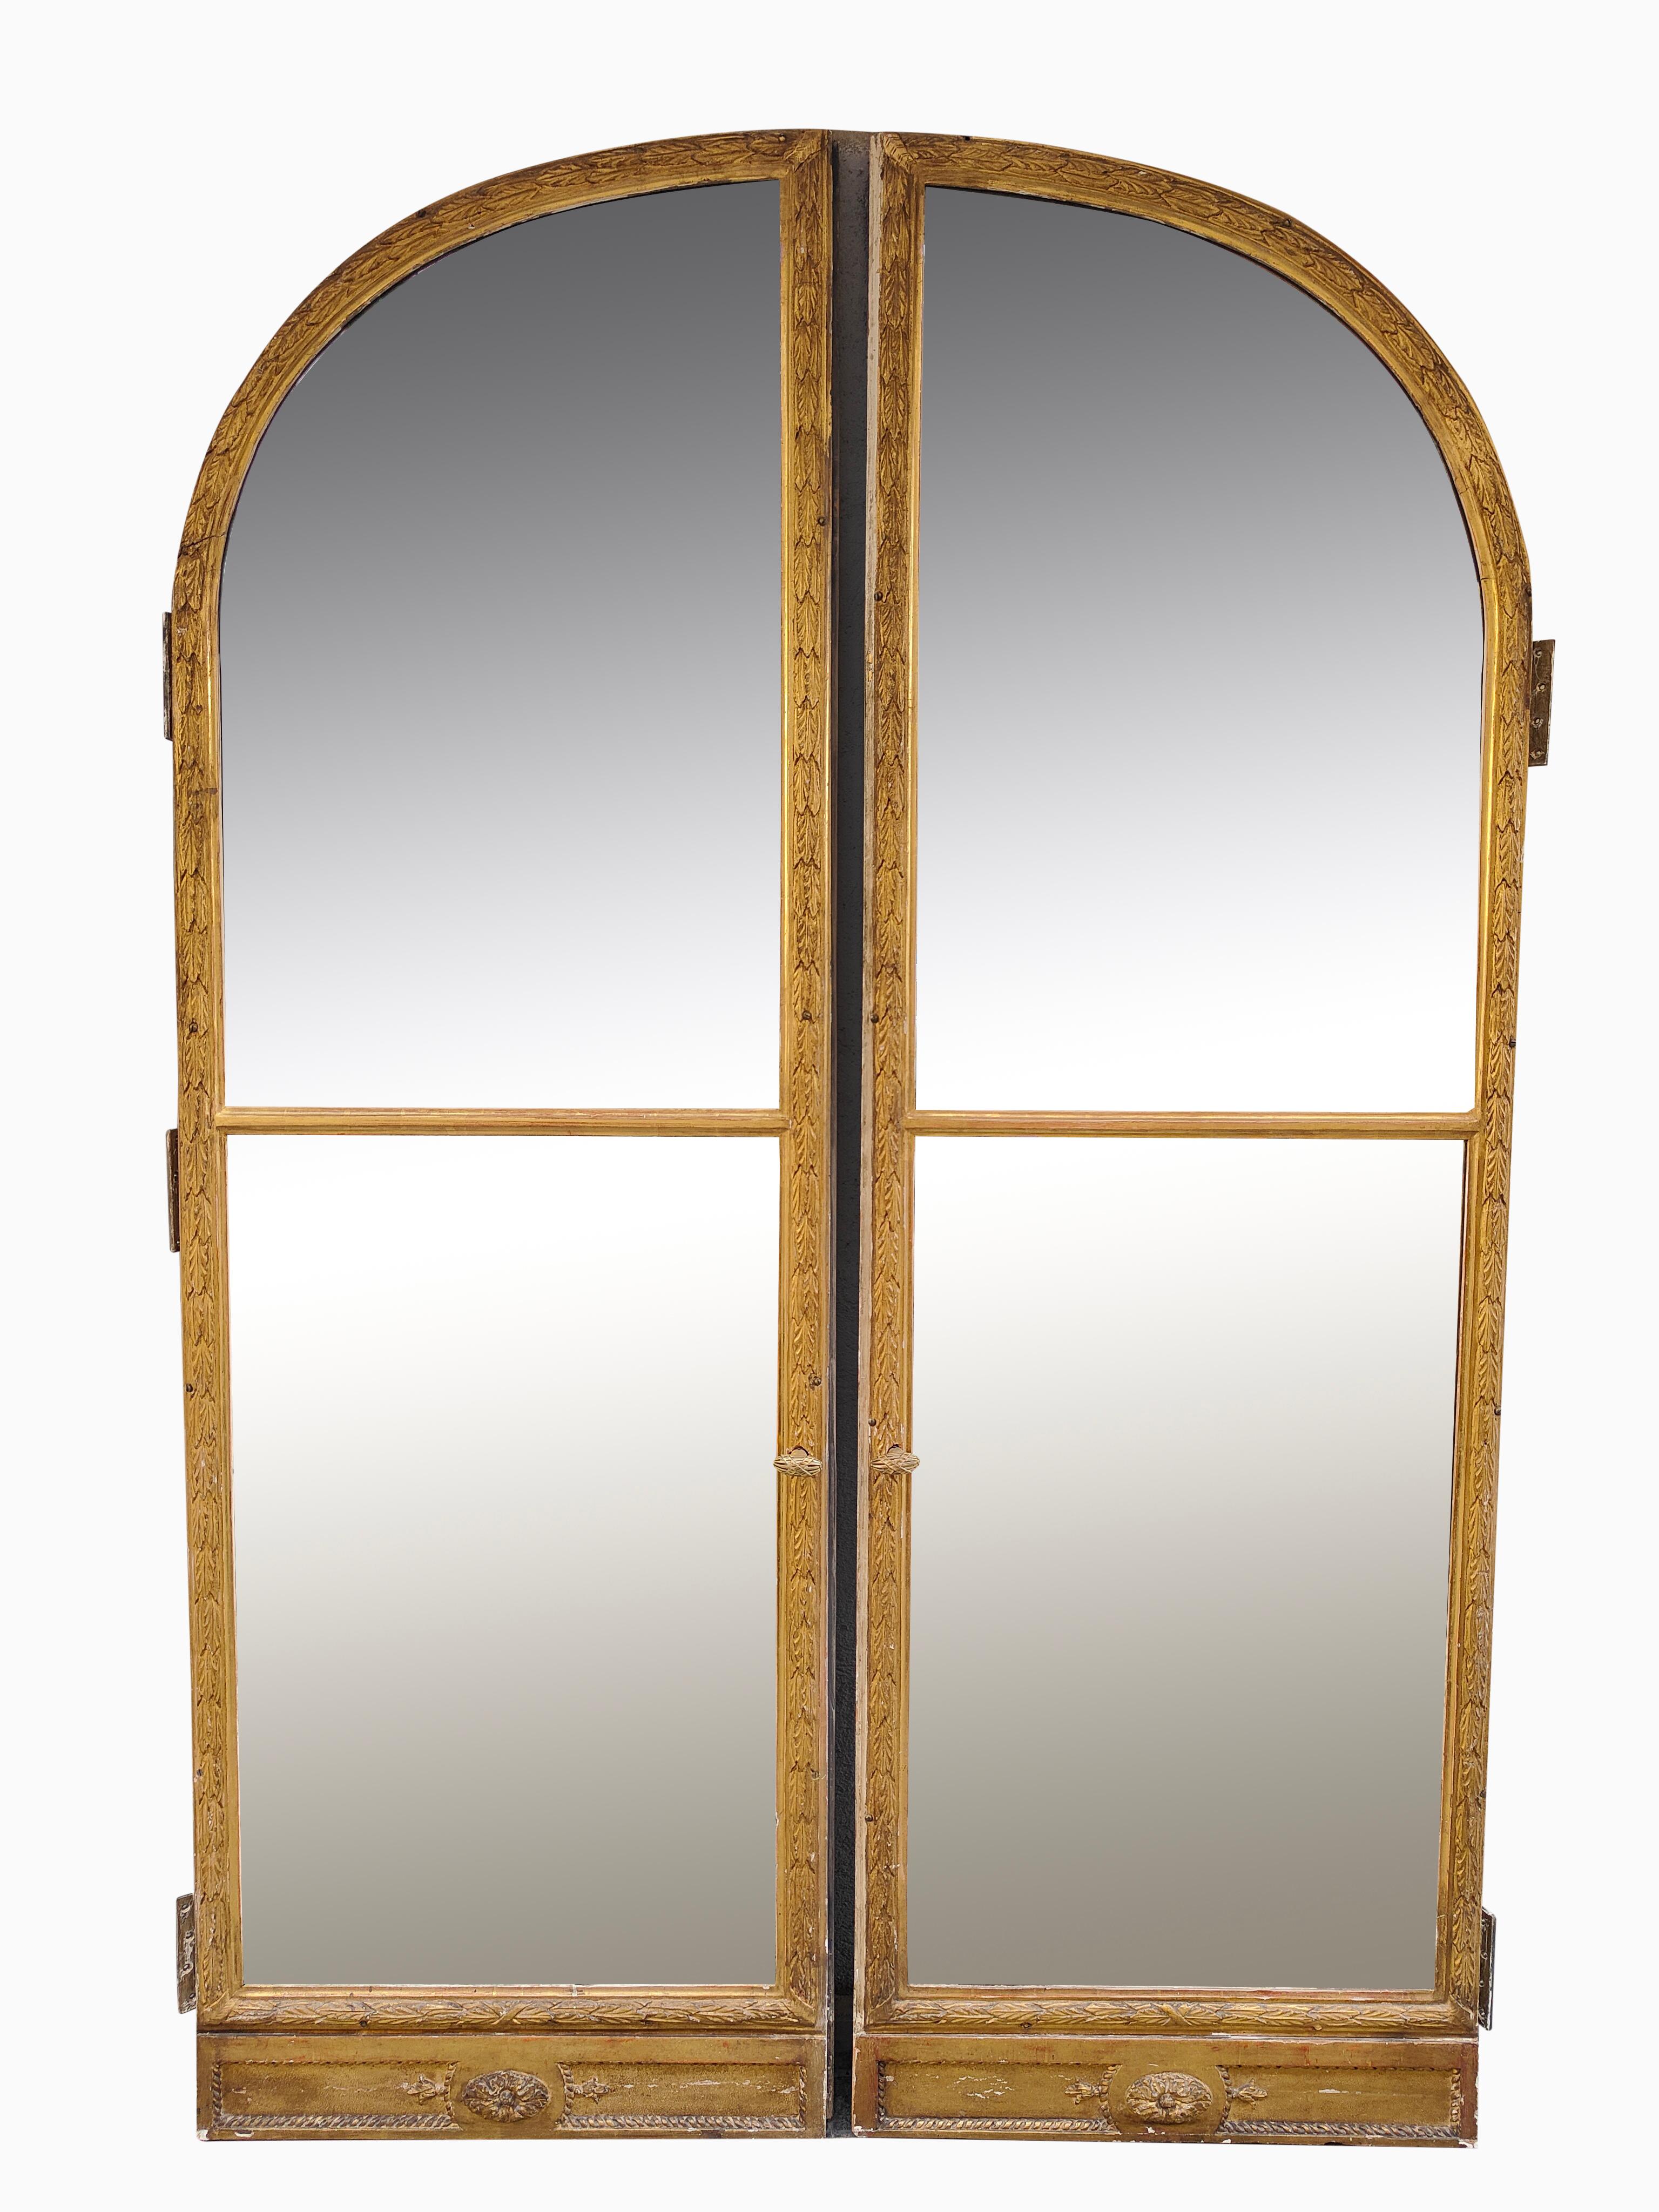 This decorative Italian door from the 19th century is a true craftsmanship gem. Crafted in gilded wood and painted on one side, it features mirrors on the other side. It is in excellent condition and measures 146x220 cm.

Combining elegance and